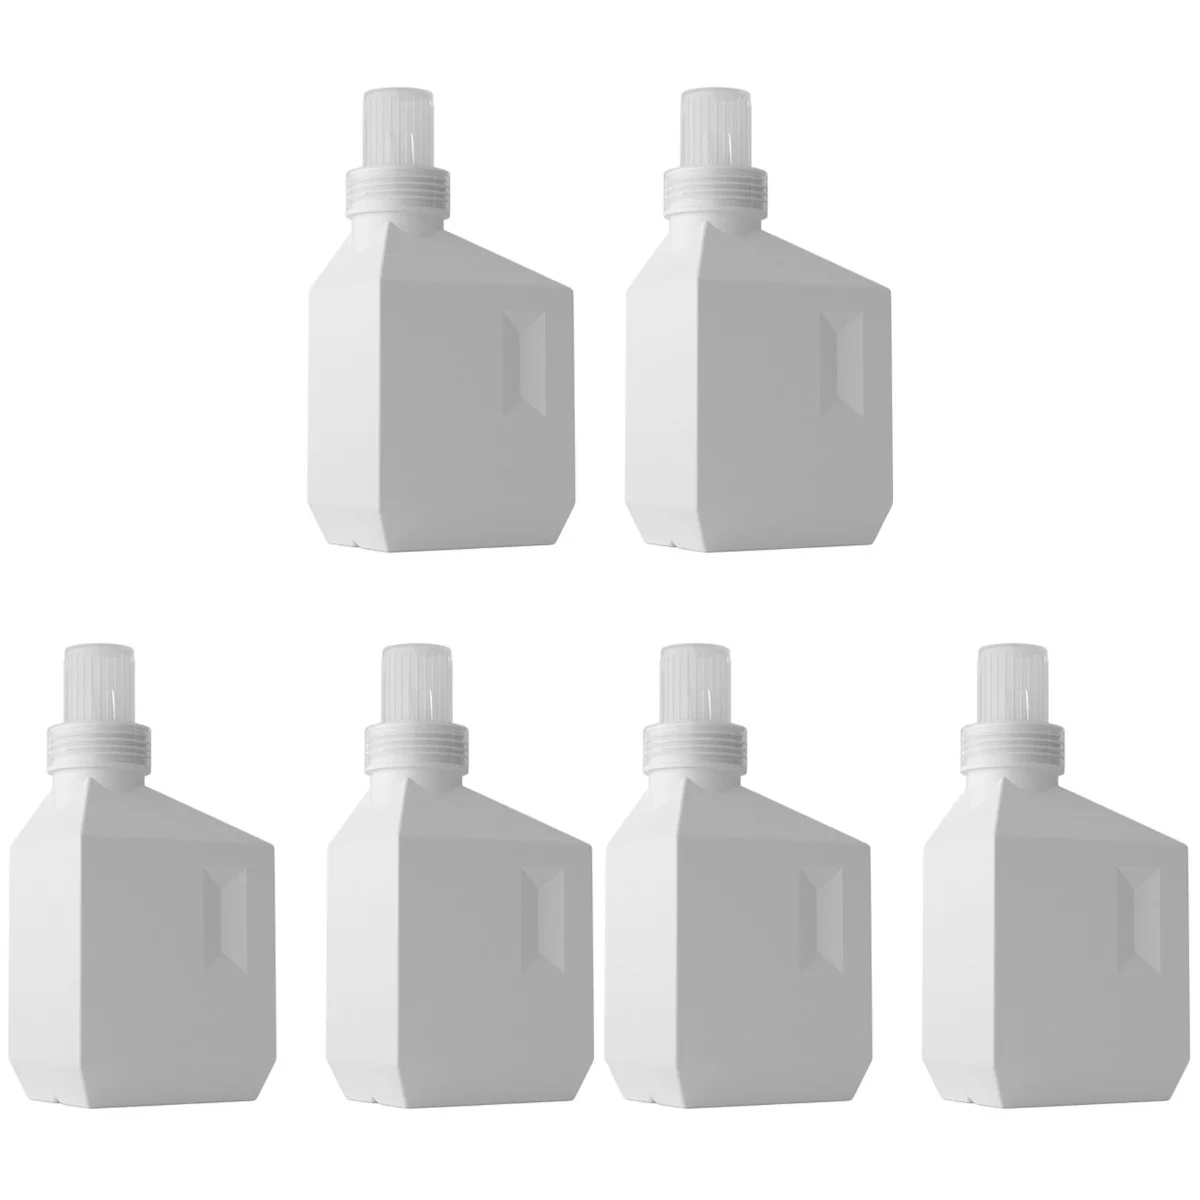 

6 Refillable Dispensers Empty Shampoo Bottles PE Laundry Detergent Containers